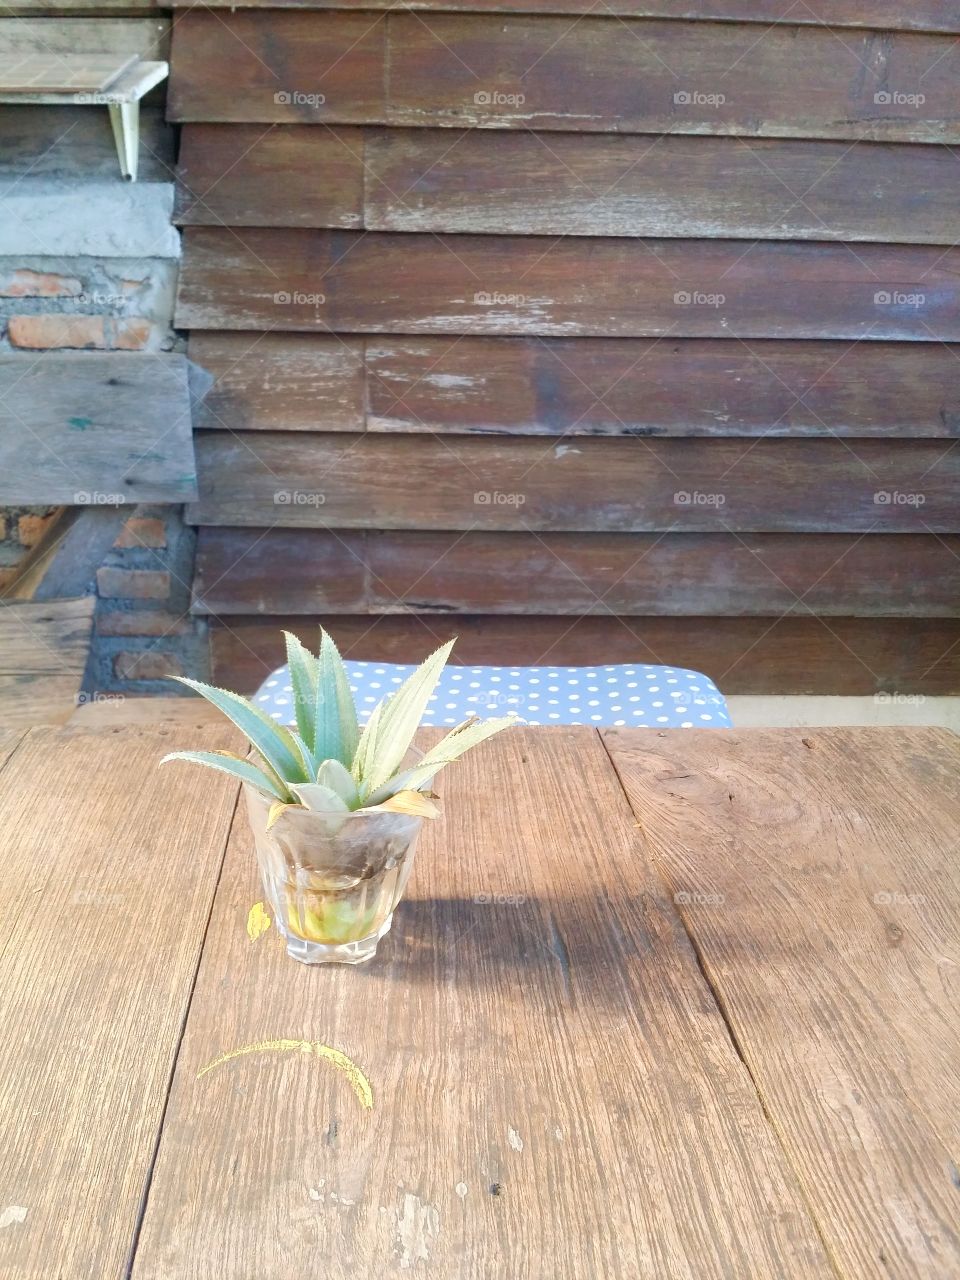 Plant in the glass on the table.